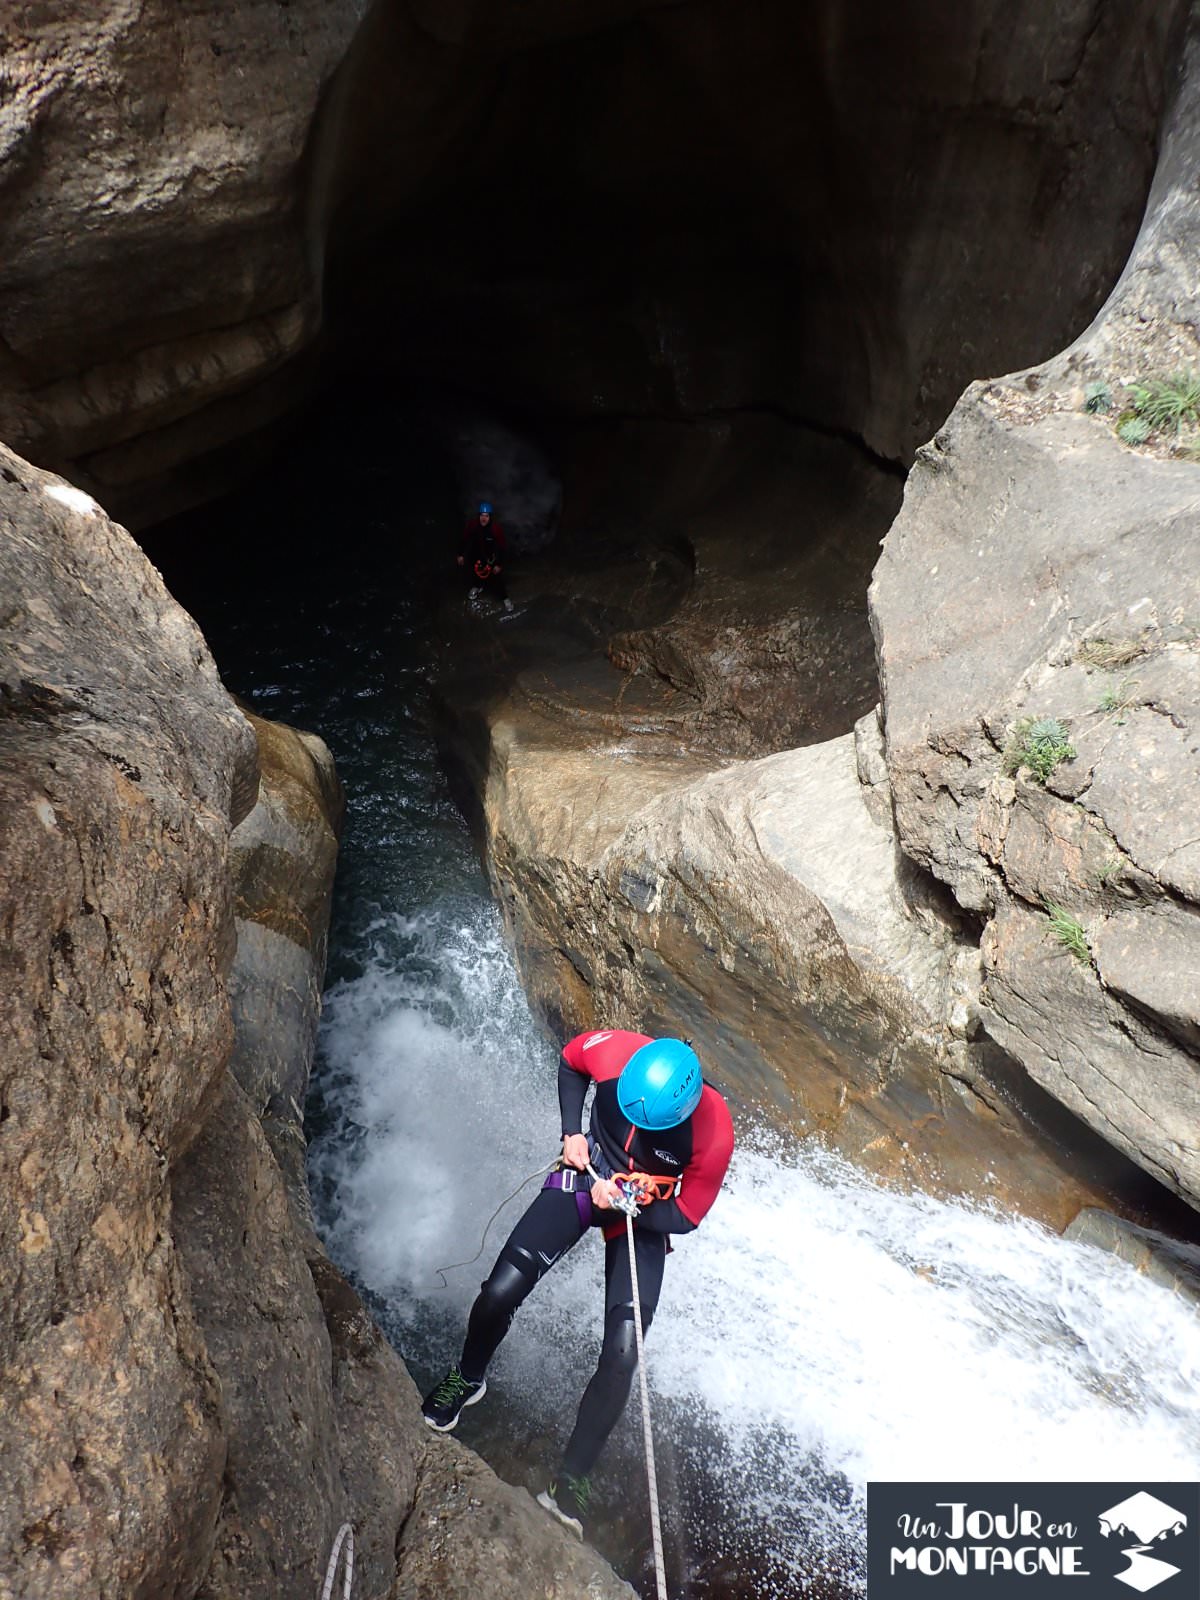 abseiling in a water vein - canyoning gorgol